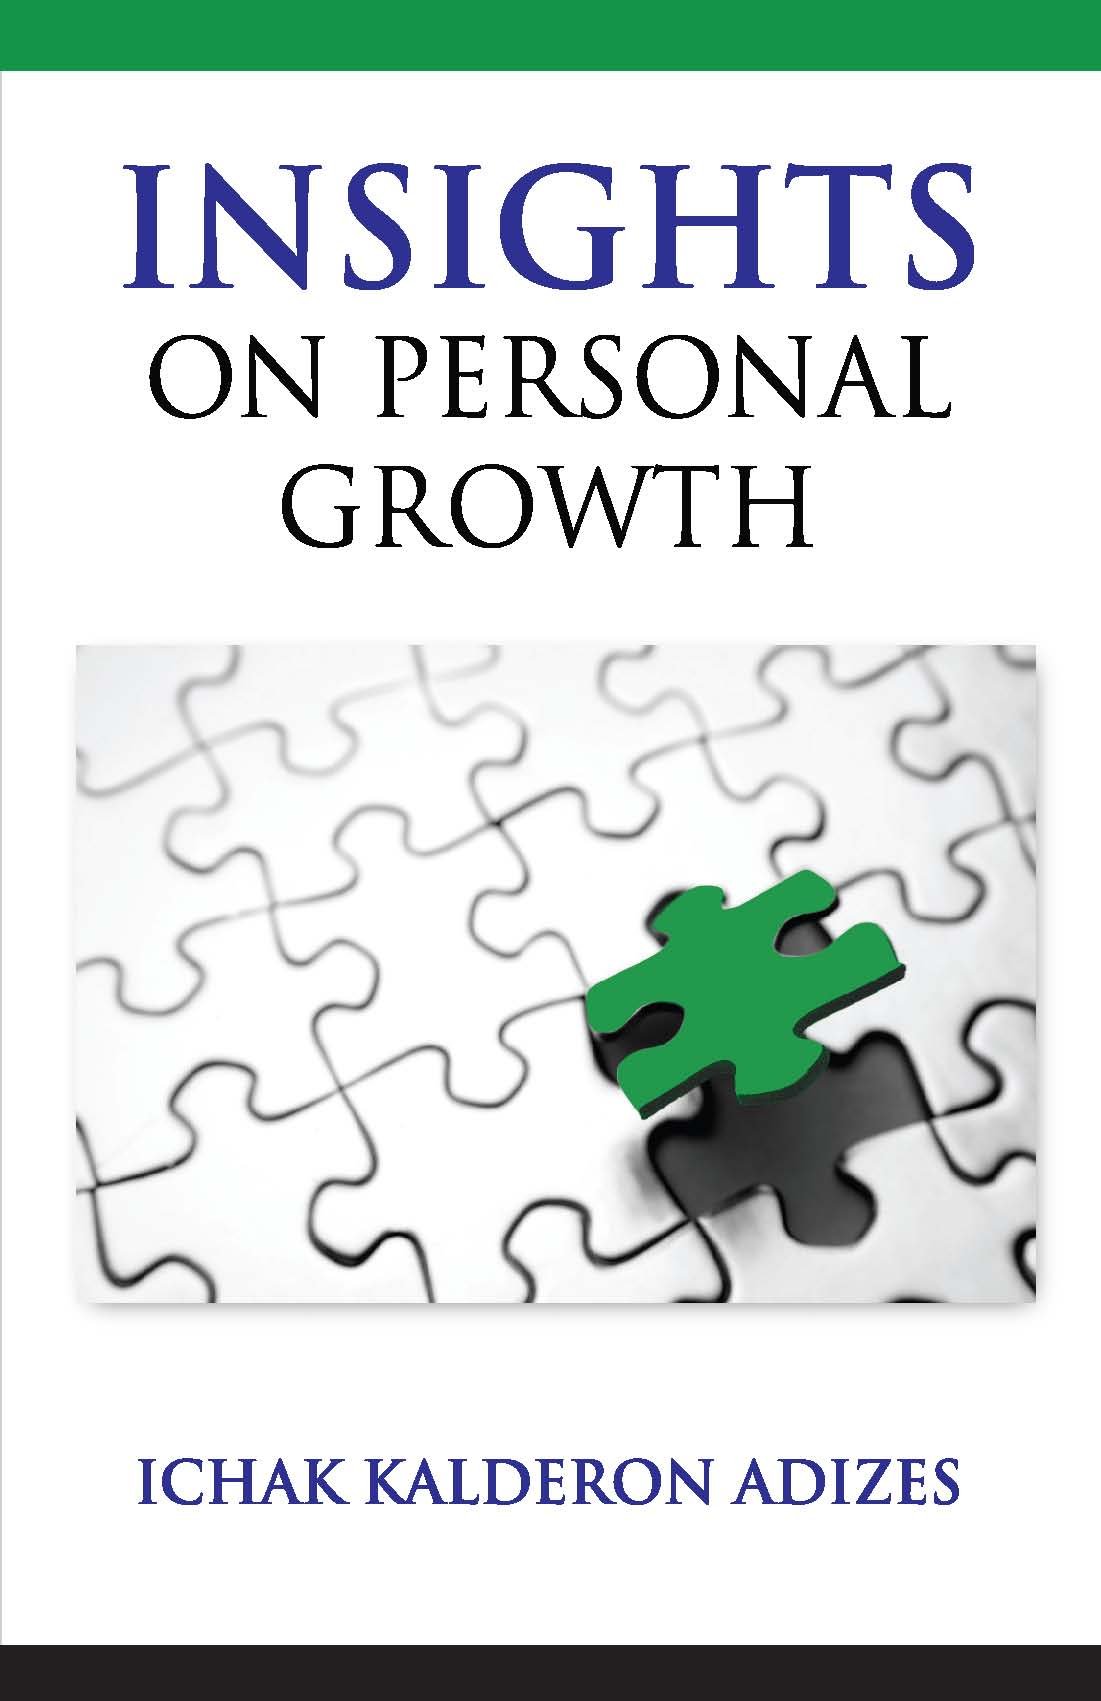 Insights on personal growth